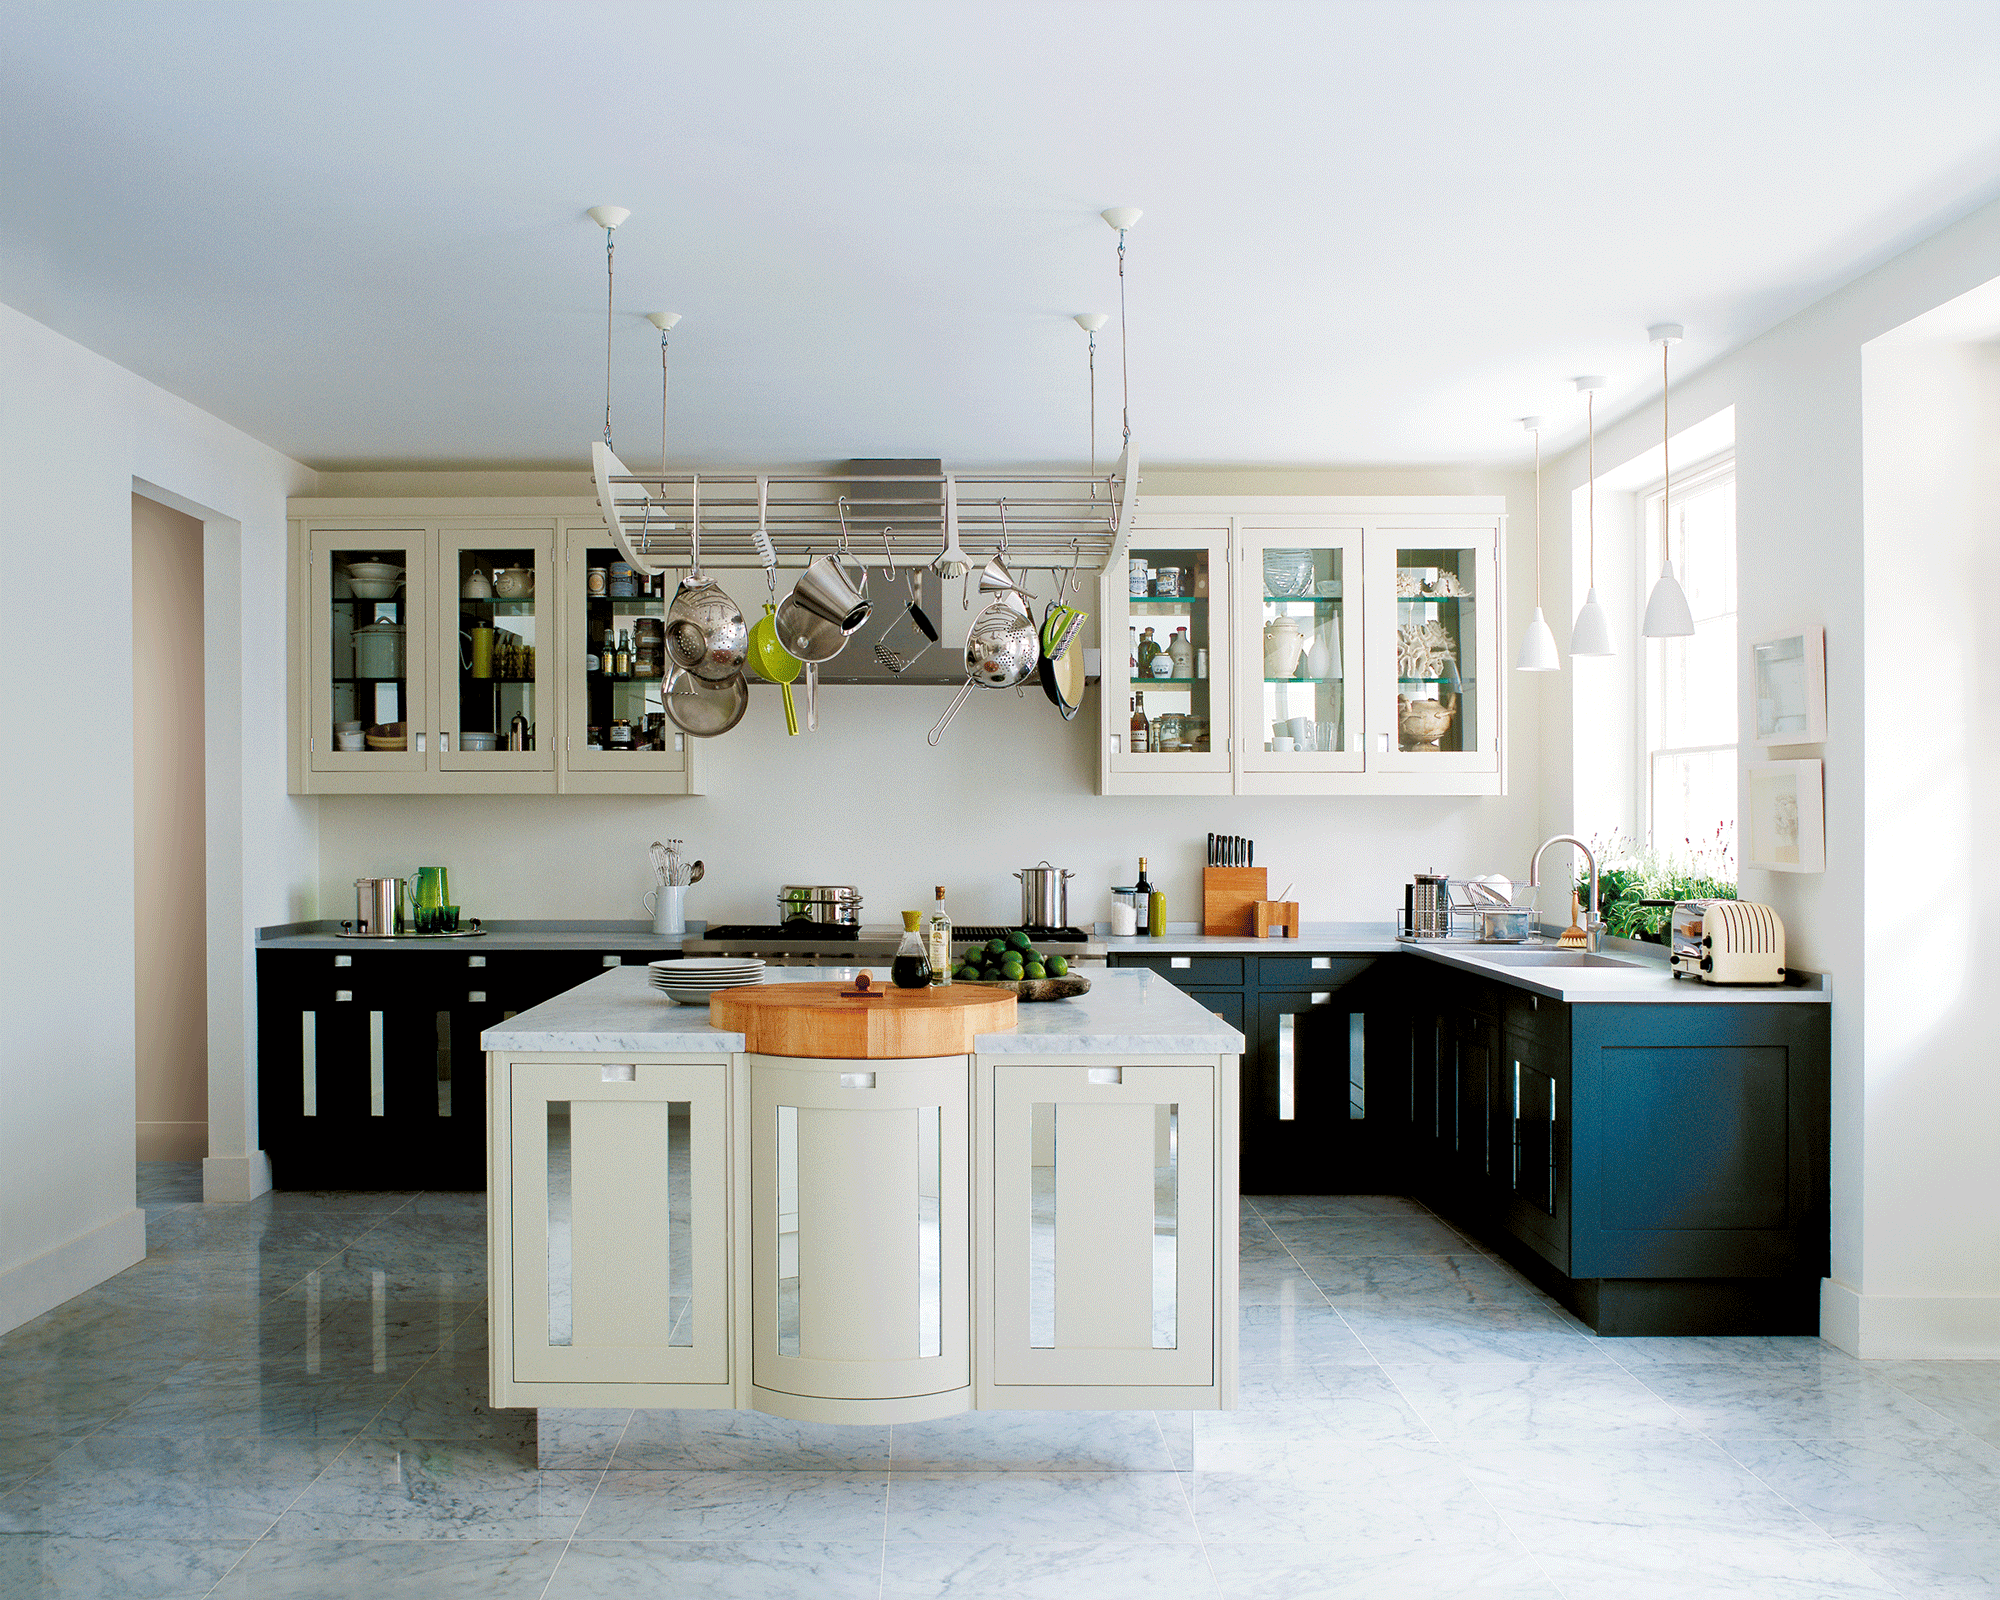 Off-white and black kitchen with hanging rack above the island